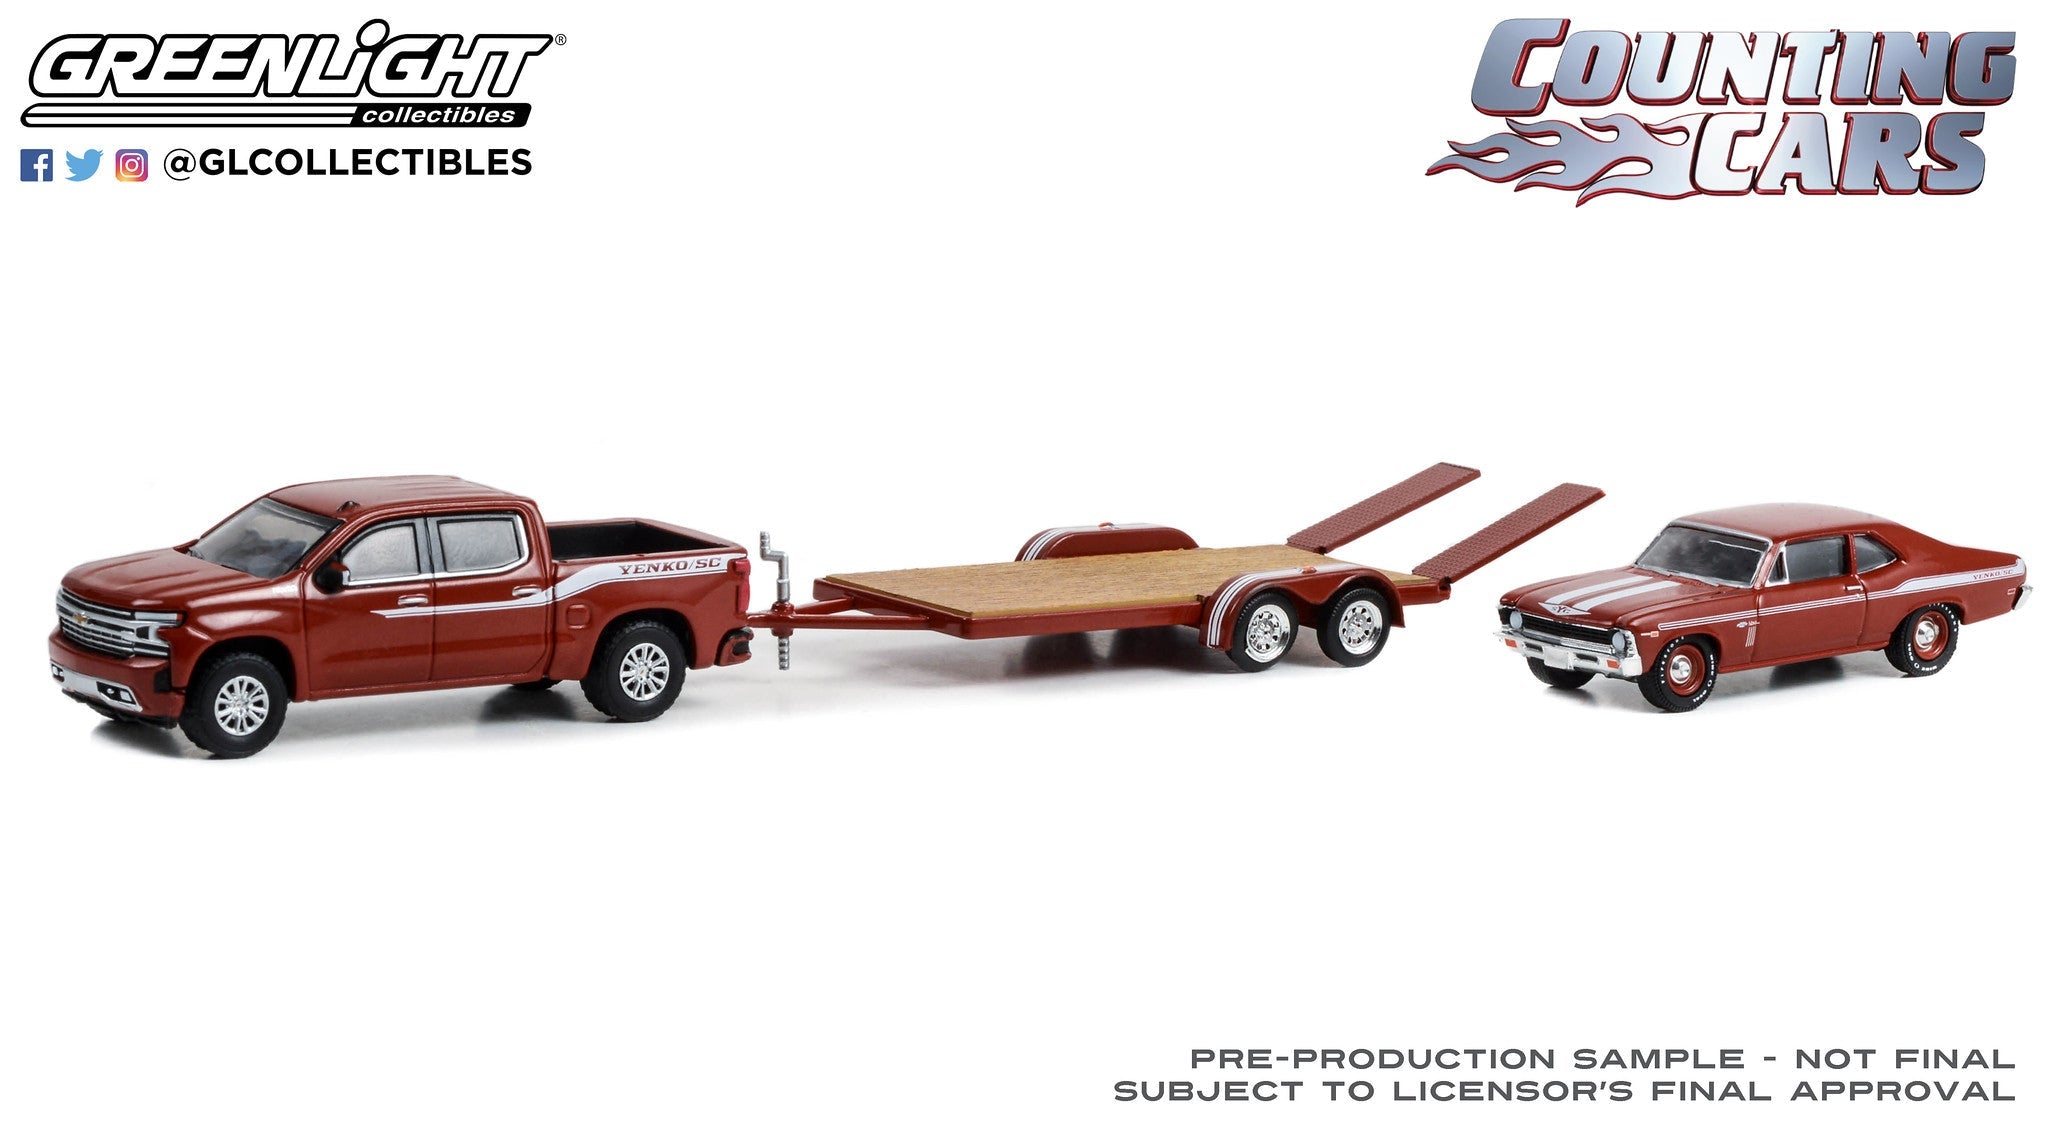 2020 Chevrolet Silverado High Country with 1969 Chevrolet Nova Yenko SC 427  on Flatbed Trailer Hollywood Hitch u0026 Tow Series 12 - Counting Cars ...